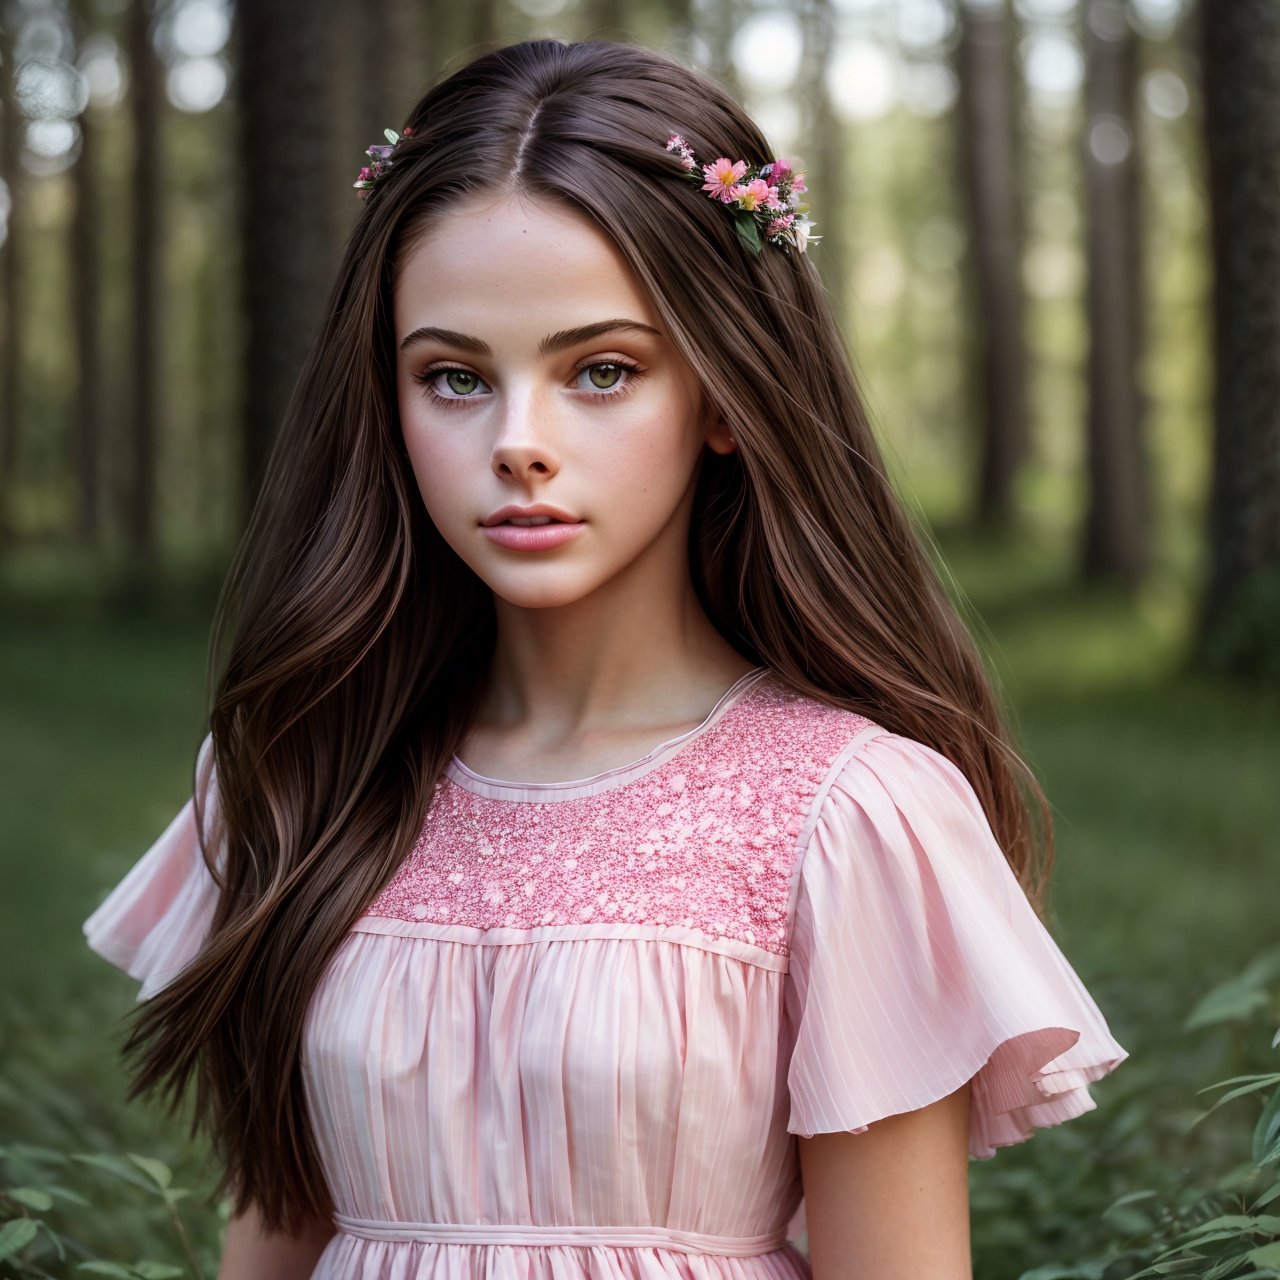 (masterpiece:1.3), best quality, looking back, portrait of stunning (AIDA_LoRA_MeW2016:1.11) <lora:AIDA_LoRA_MeW2016:0.91> in a pale pink dress in the field with trees on the backgrounds, little girl, pretty face, self-assurance, cinematic, dramatic, hyper realistic, studio photo, studio photo, kkw-ph1, hdr, f1.7, (colorful:1.1)